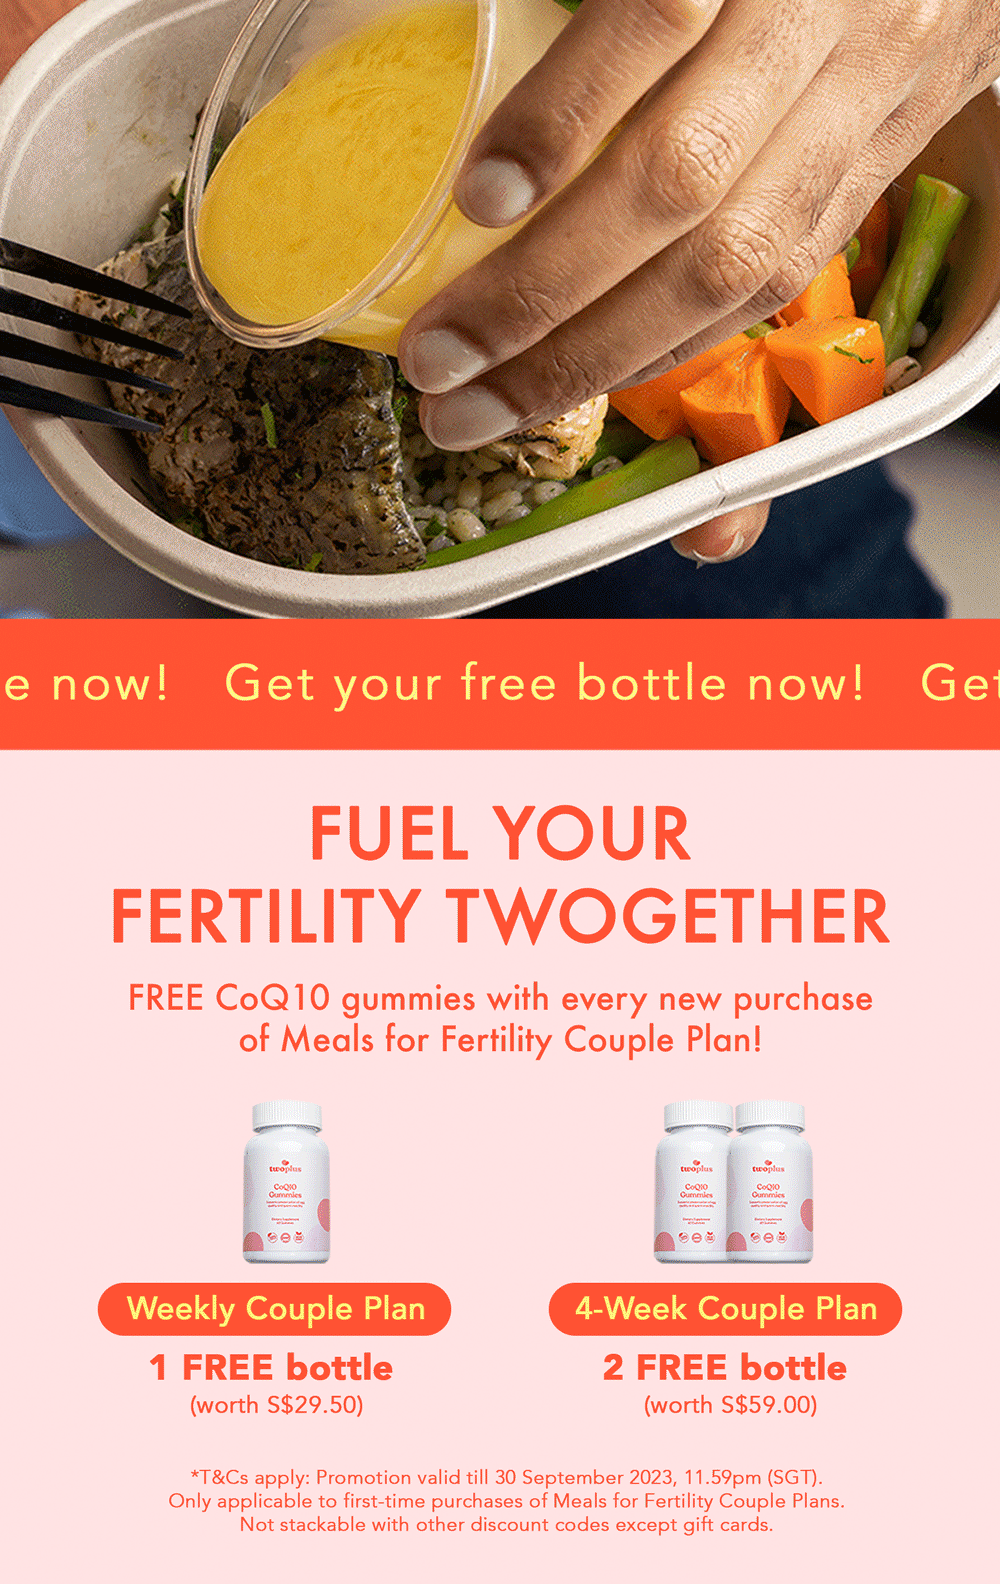 Meals for Fertility gift with purchase free CoQ10 gummies